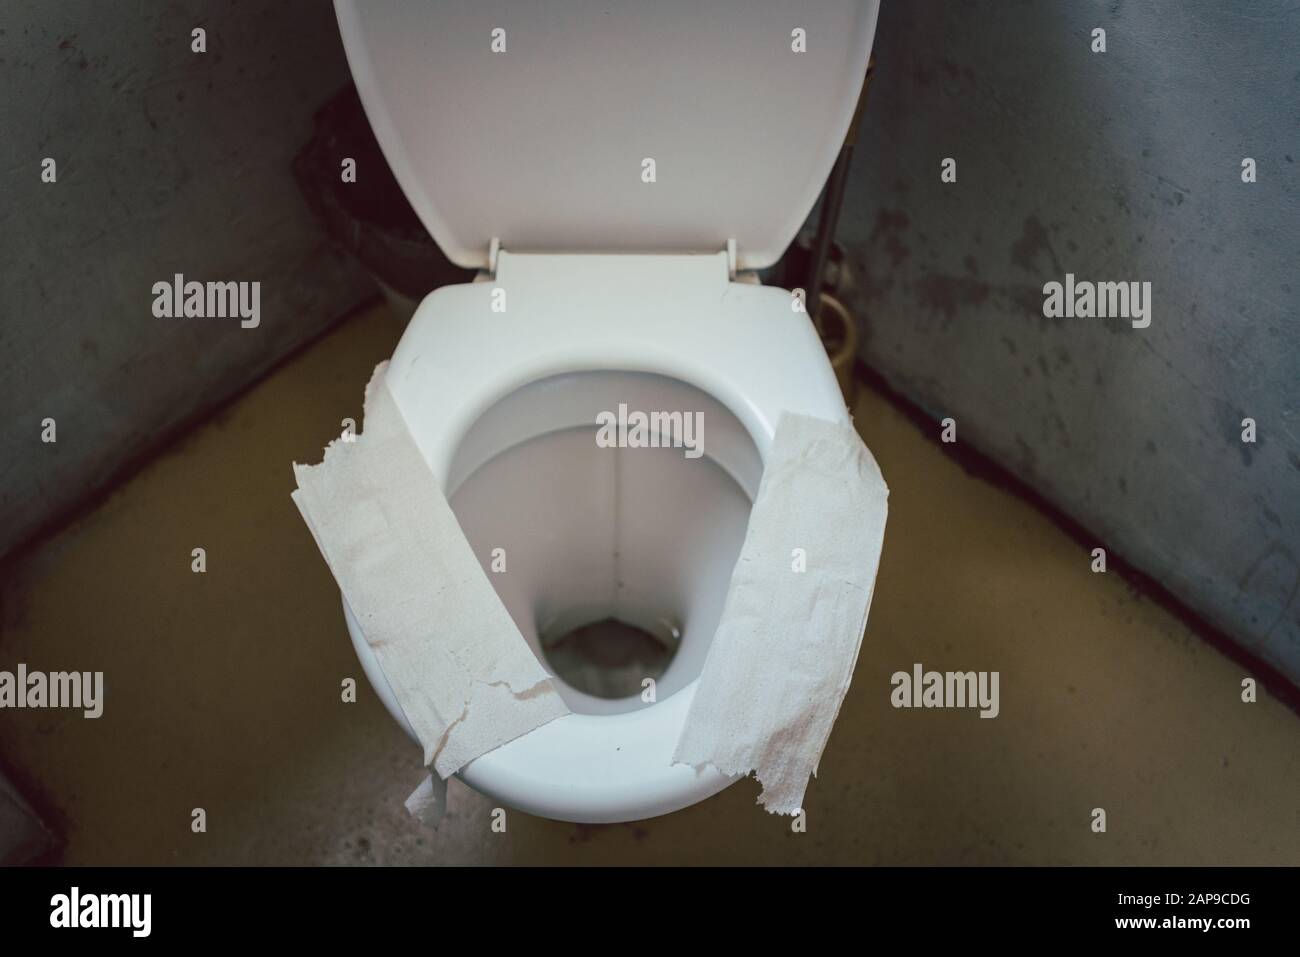 Filthy toilet seat covered with toilet paper as sit down insulation Stock Photo